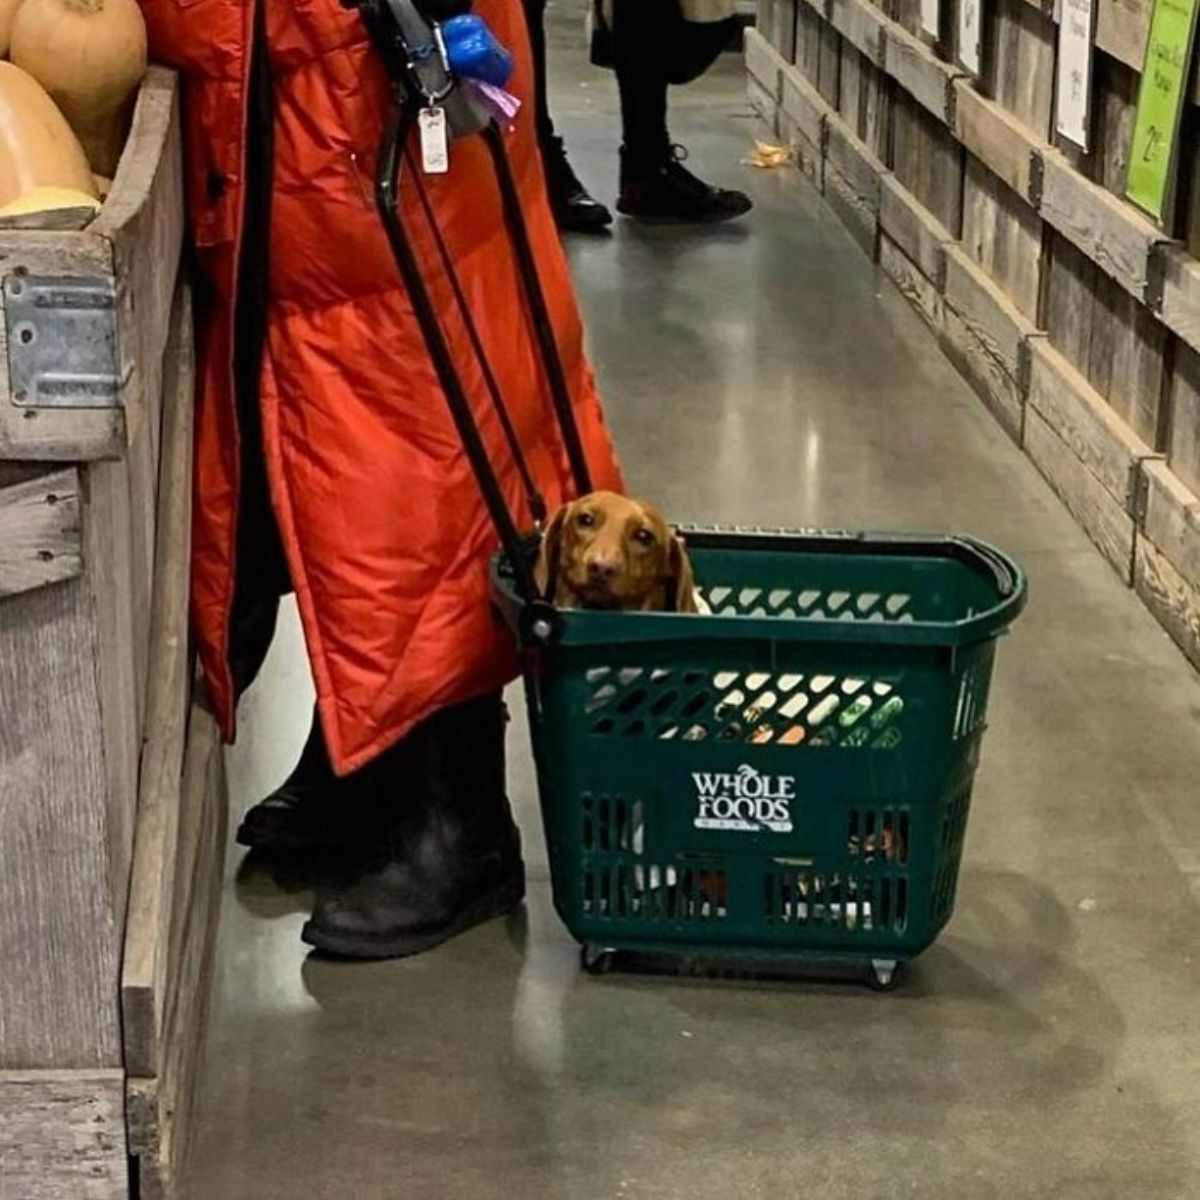 brown dog in a whole foods basket next to a person wearing an orange jacket and black boots